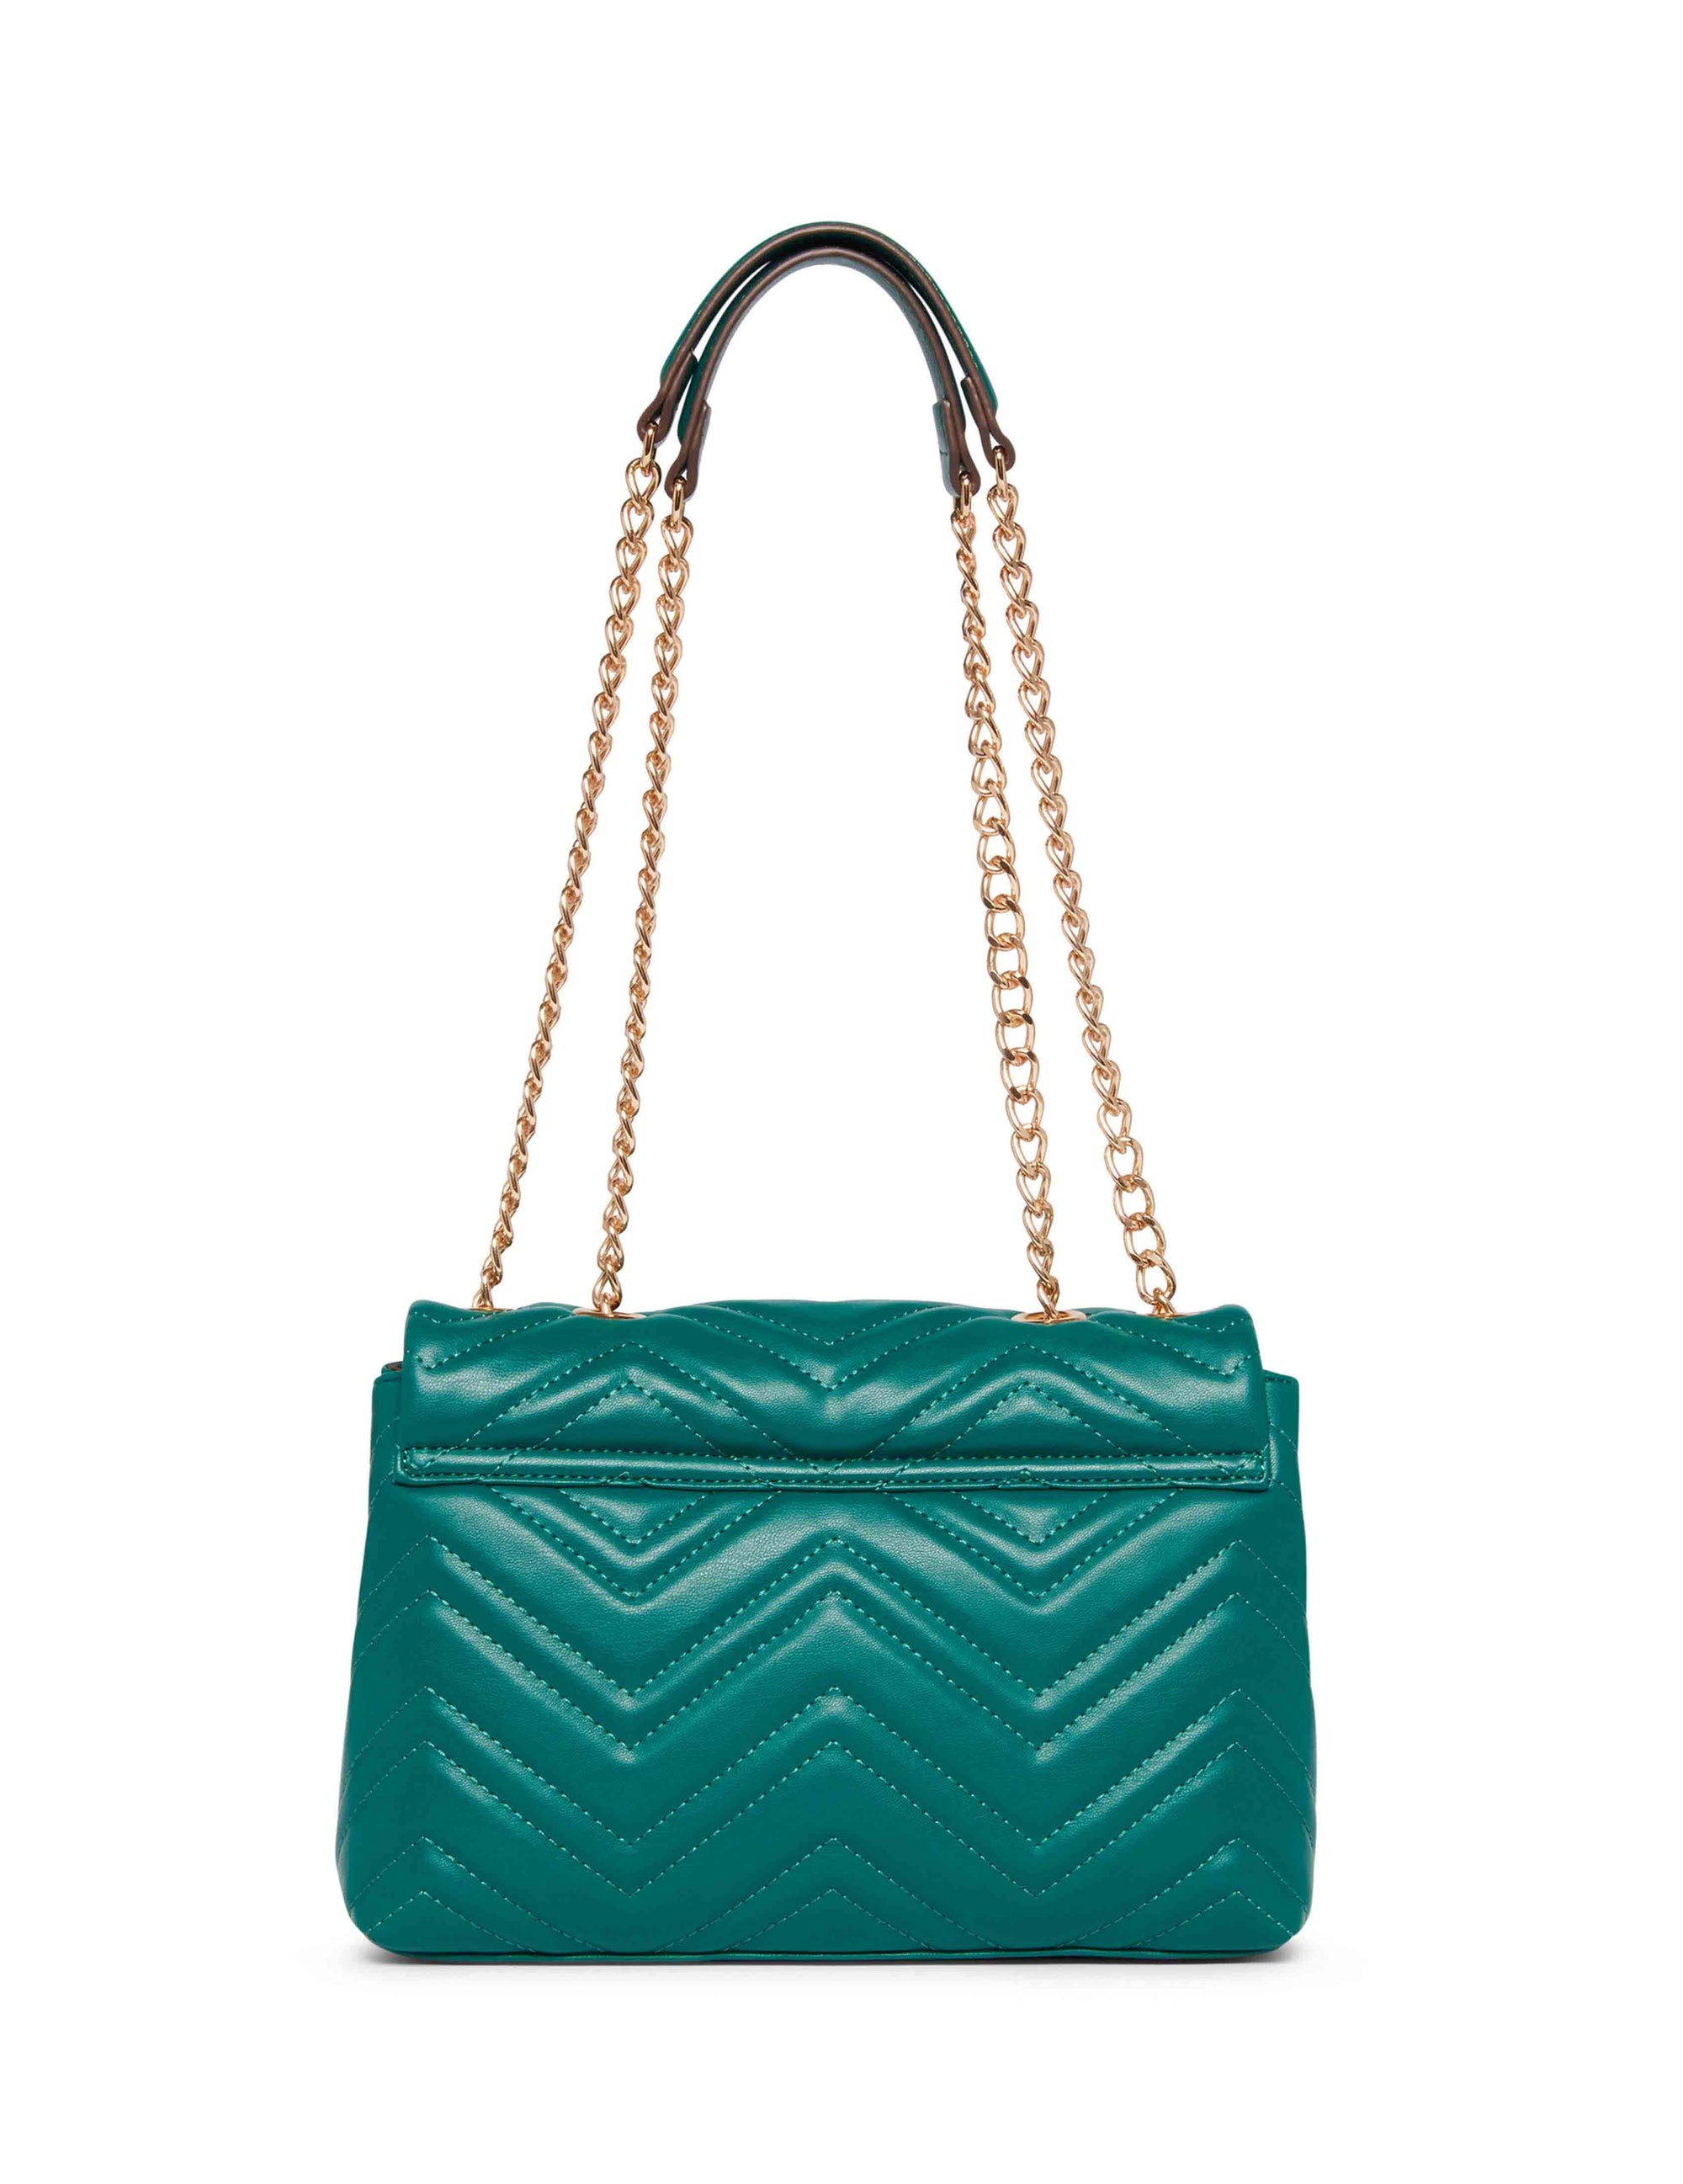 Anne Klein Emerald Quilted Convertible Flap Shoulder Bag With Turn Lock